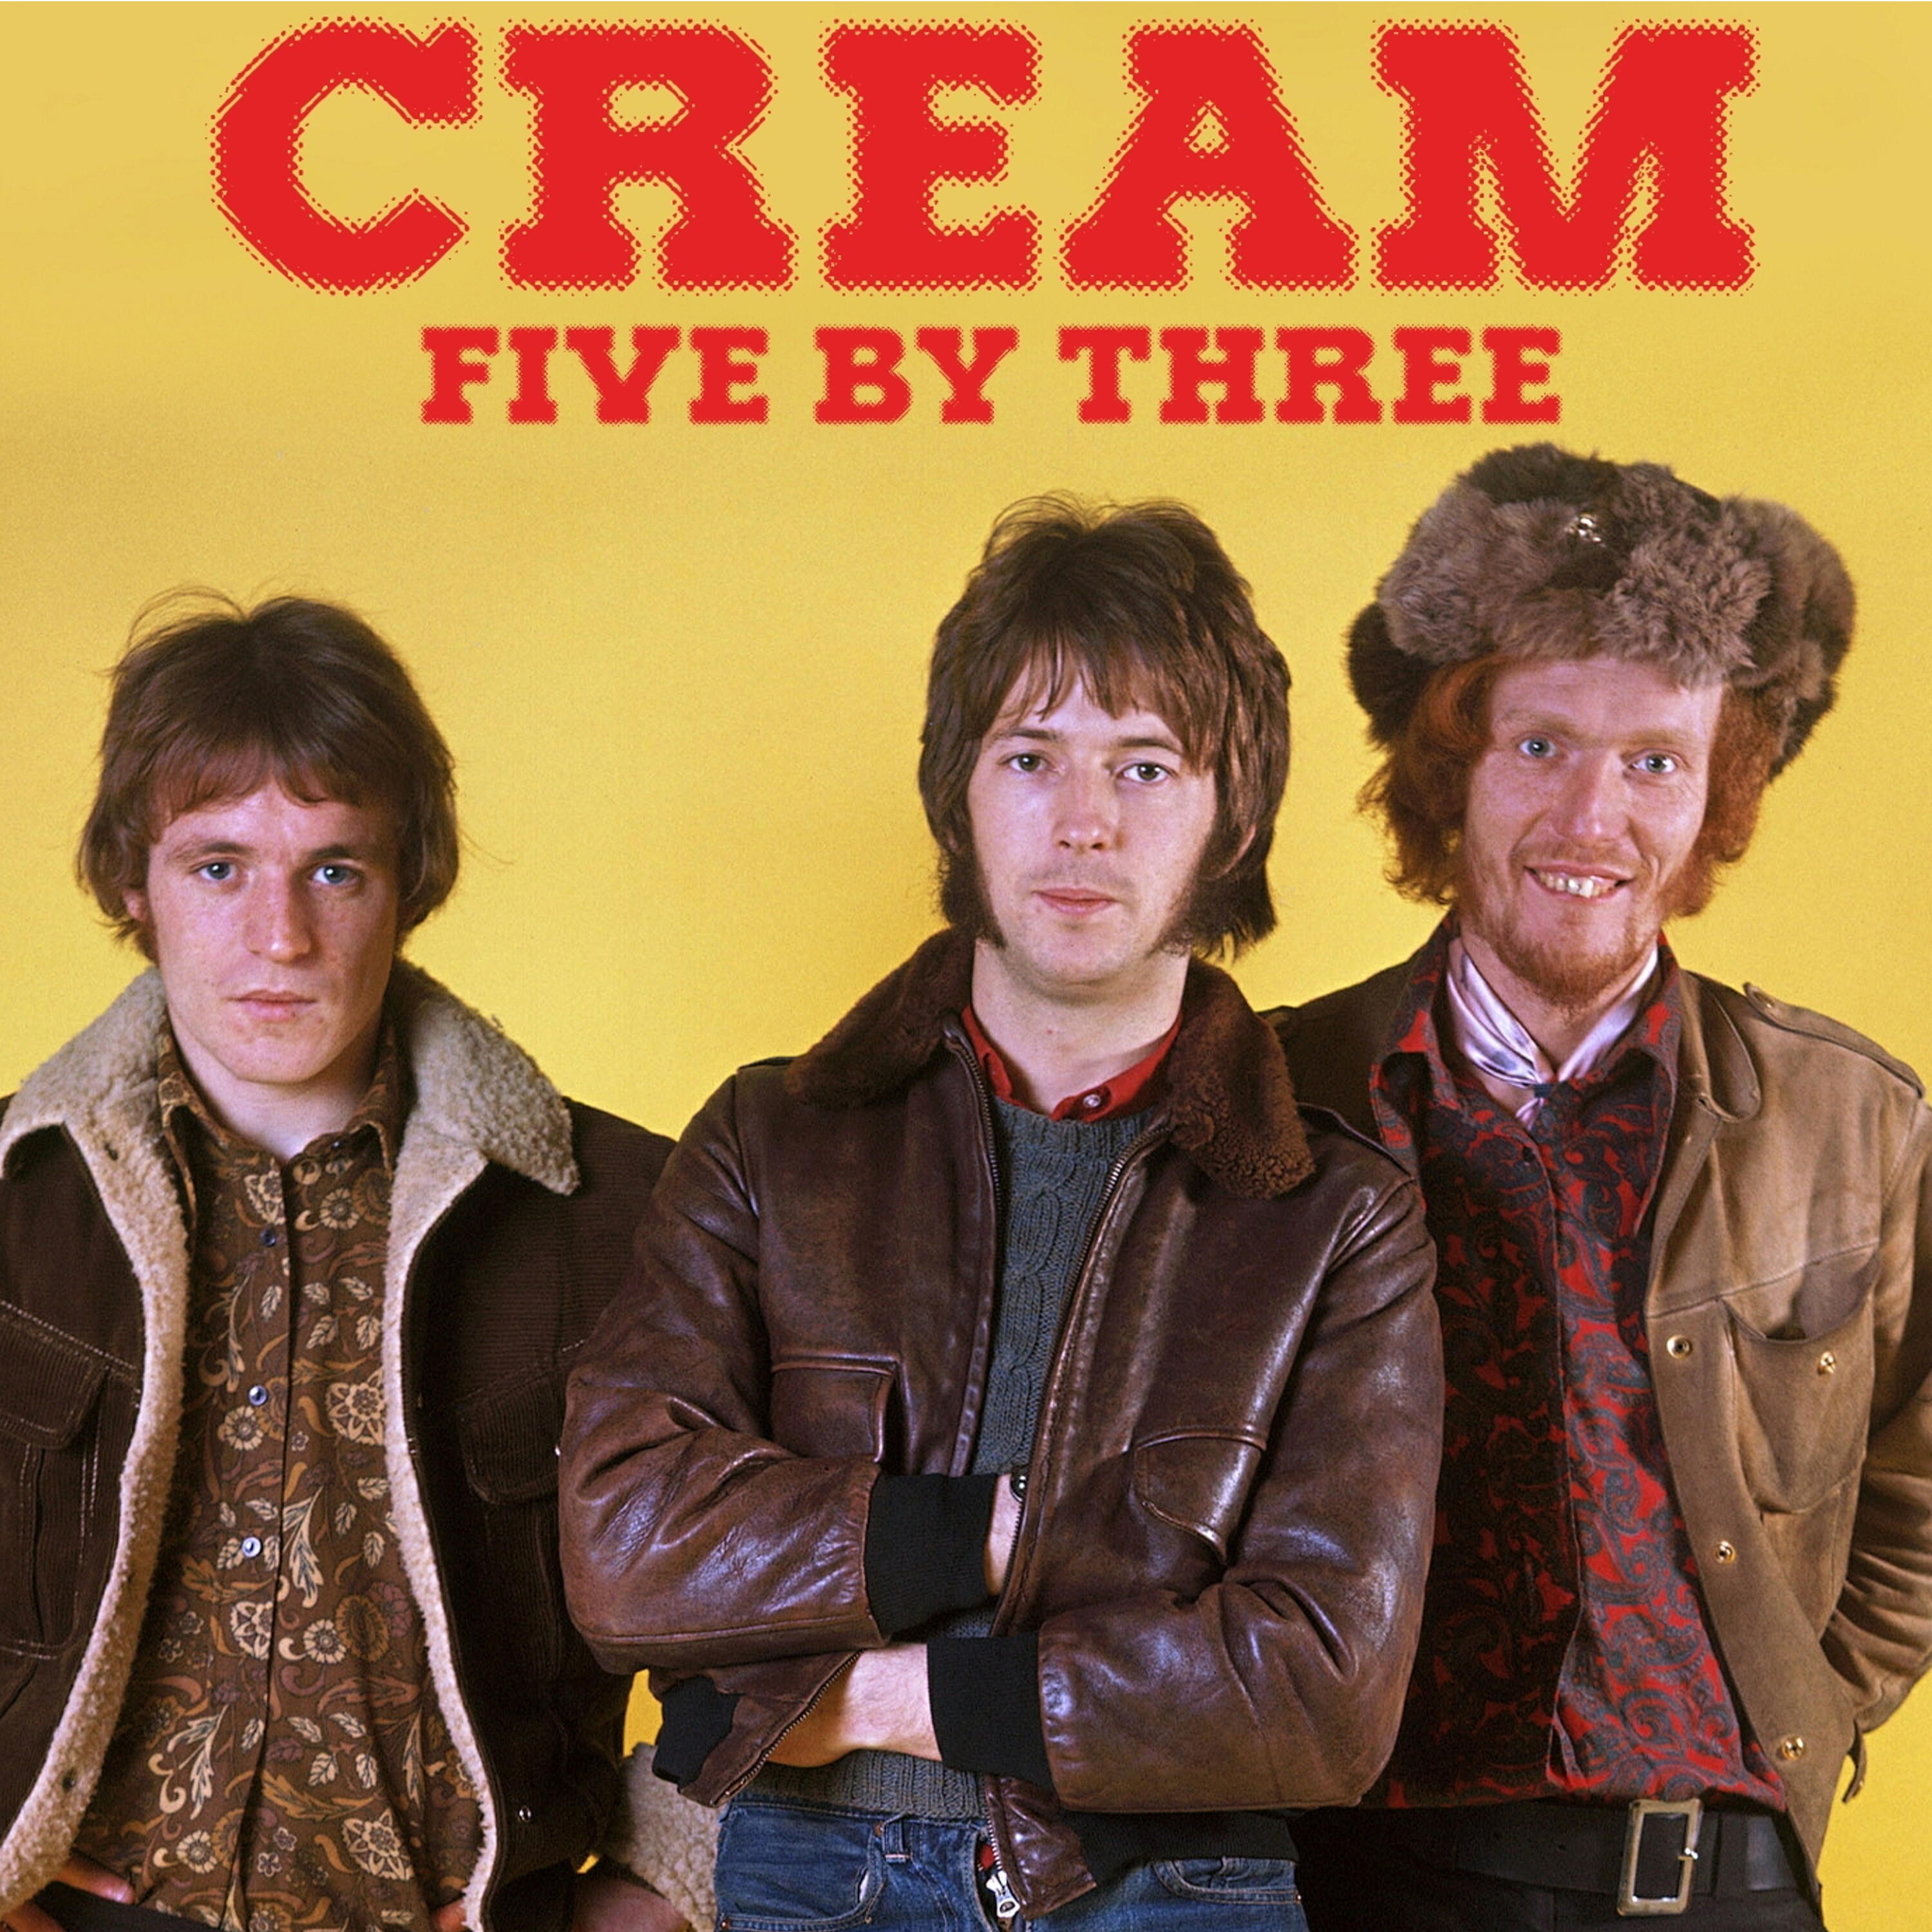 Stream Free Songs by Cream & Similar Artists | iHeartRadio